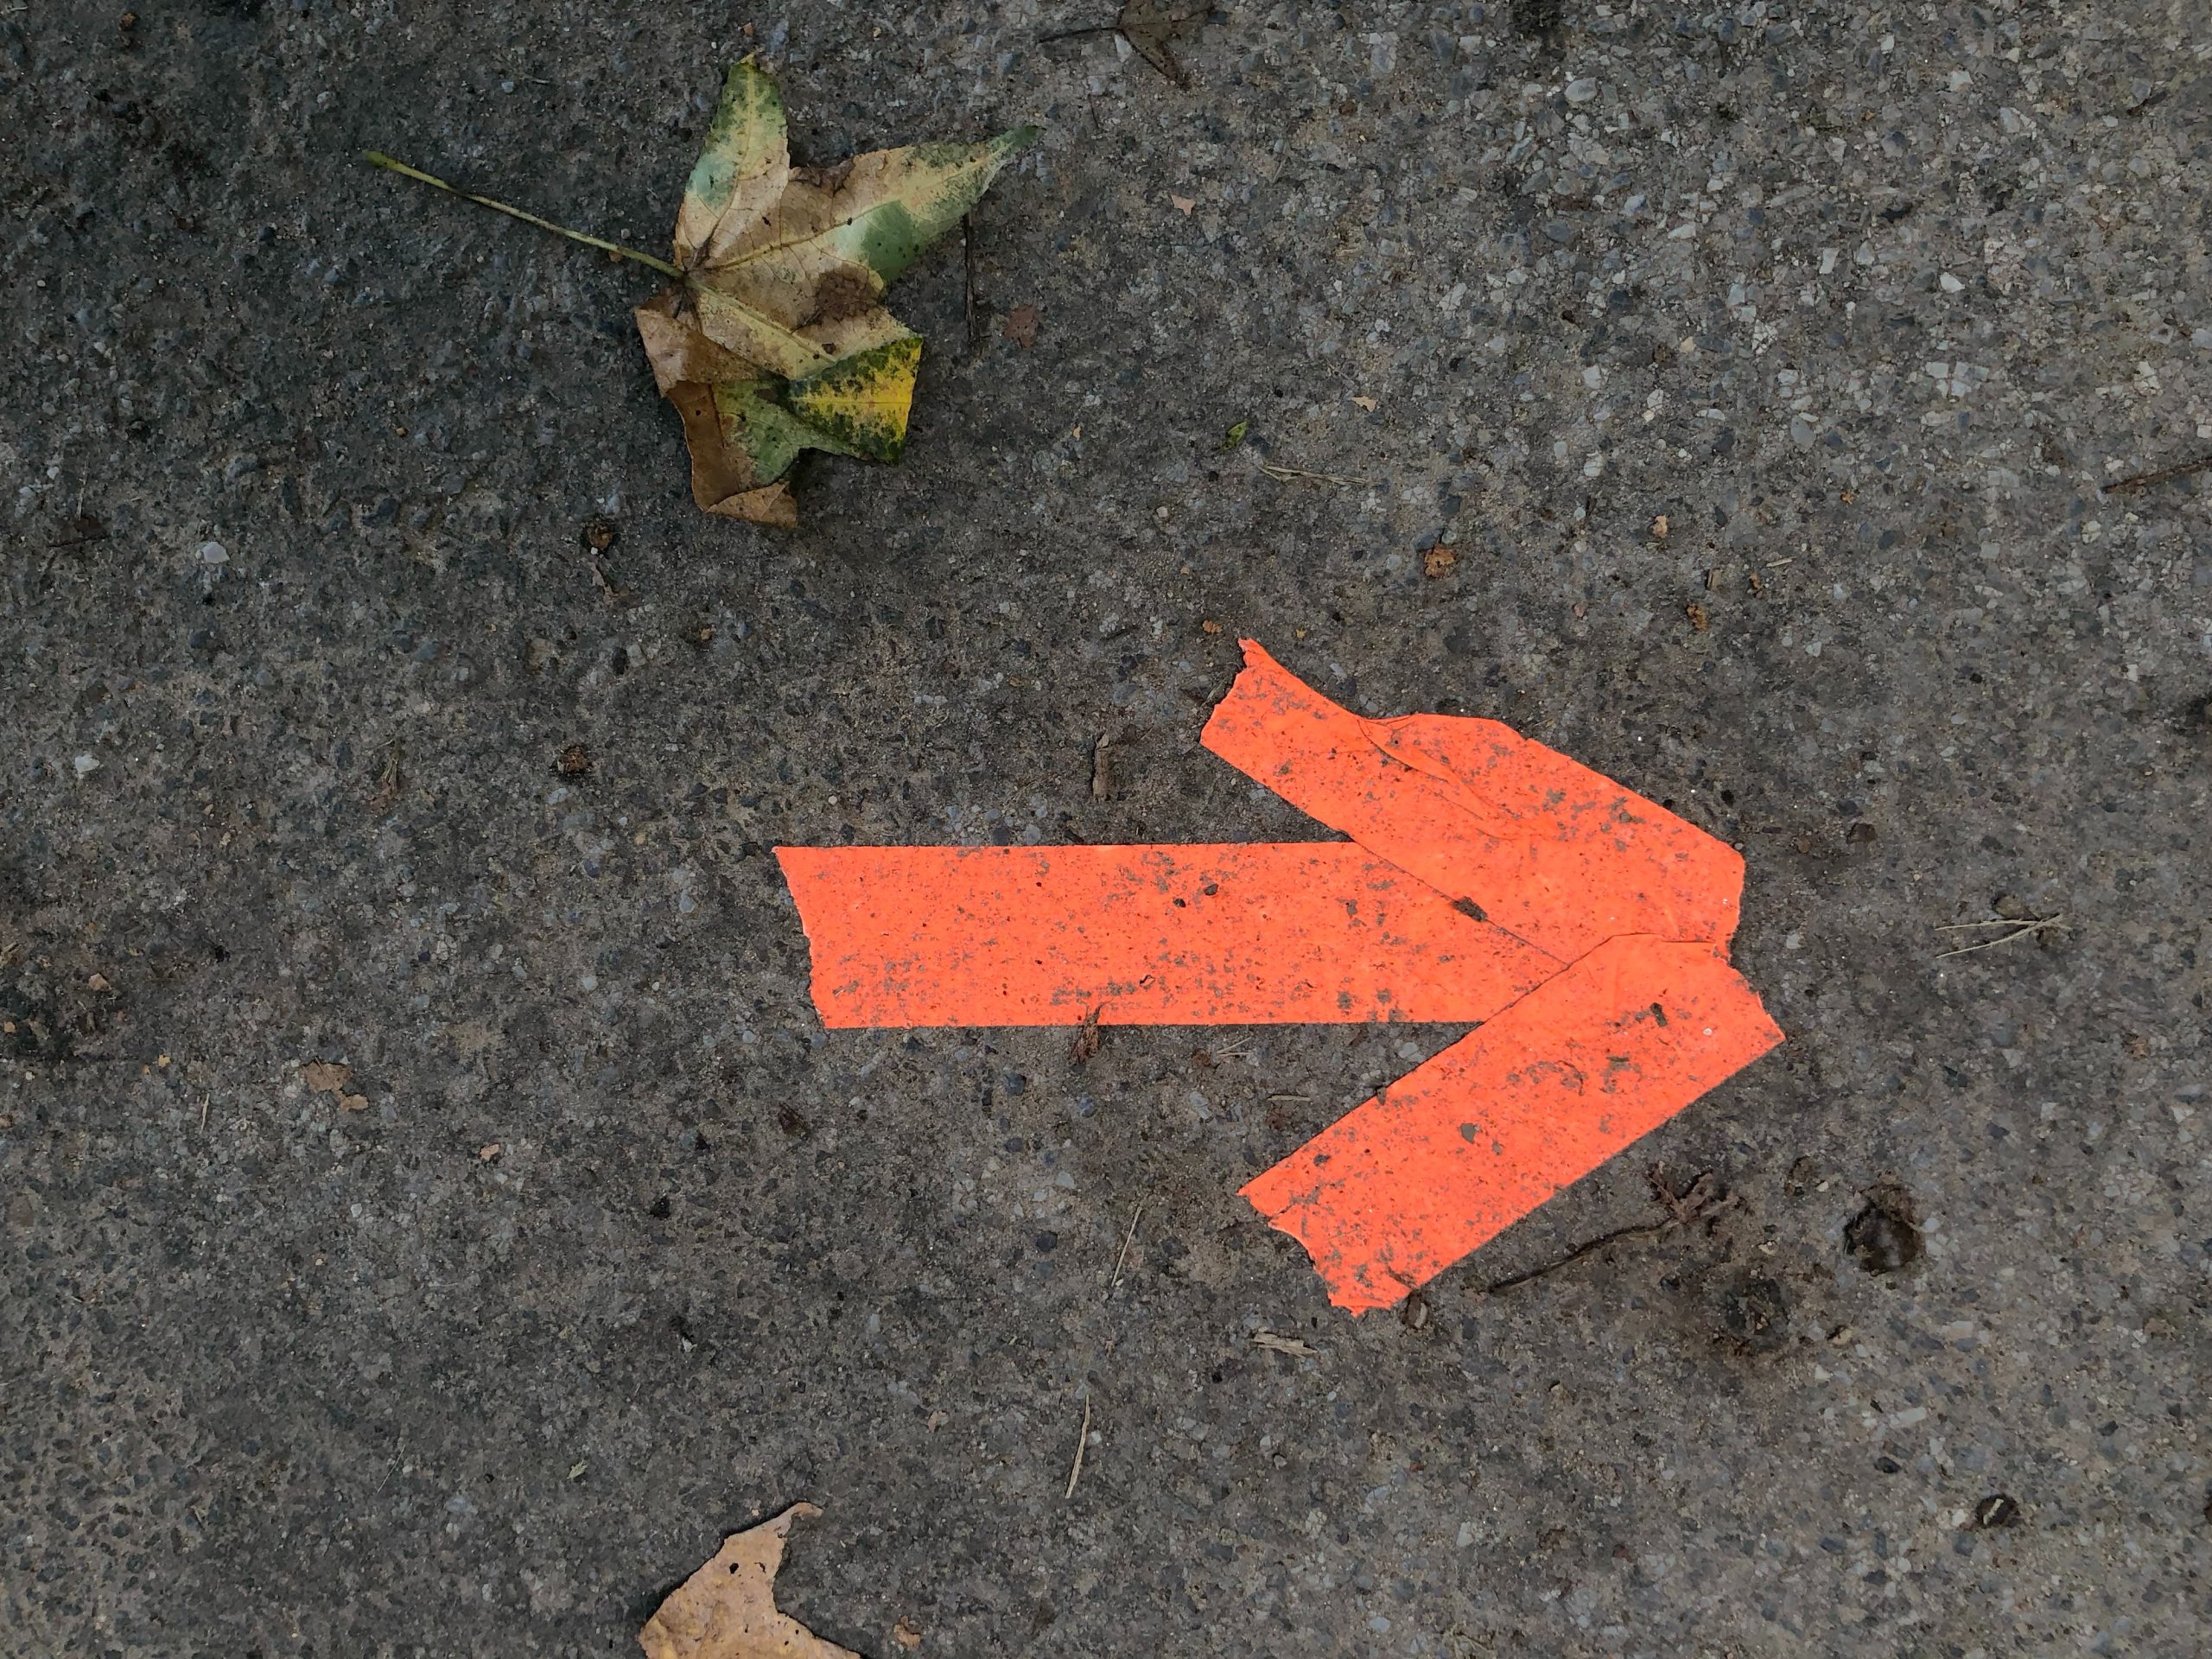 A red arrow made of tape pointing to the right